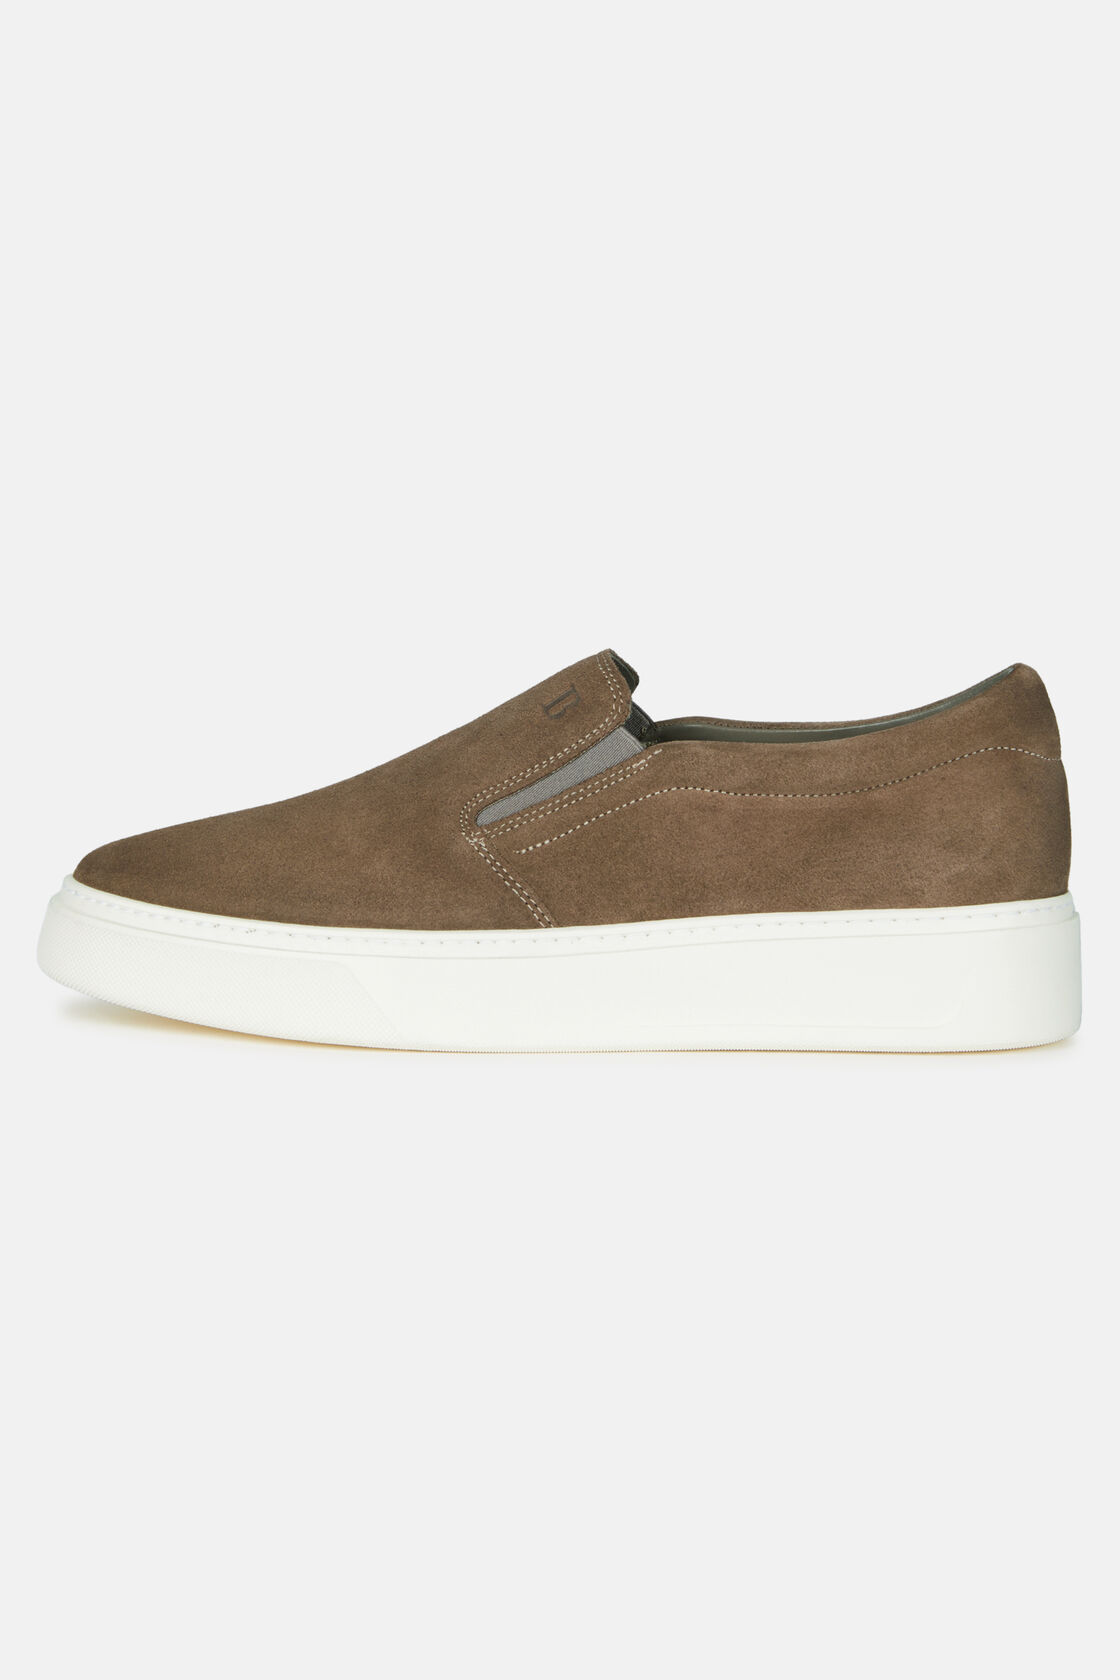 Slip-On In Pelle Scamosciata Taupe, Taupe, hi-res